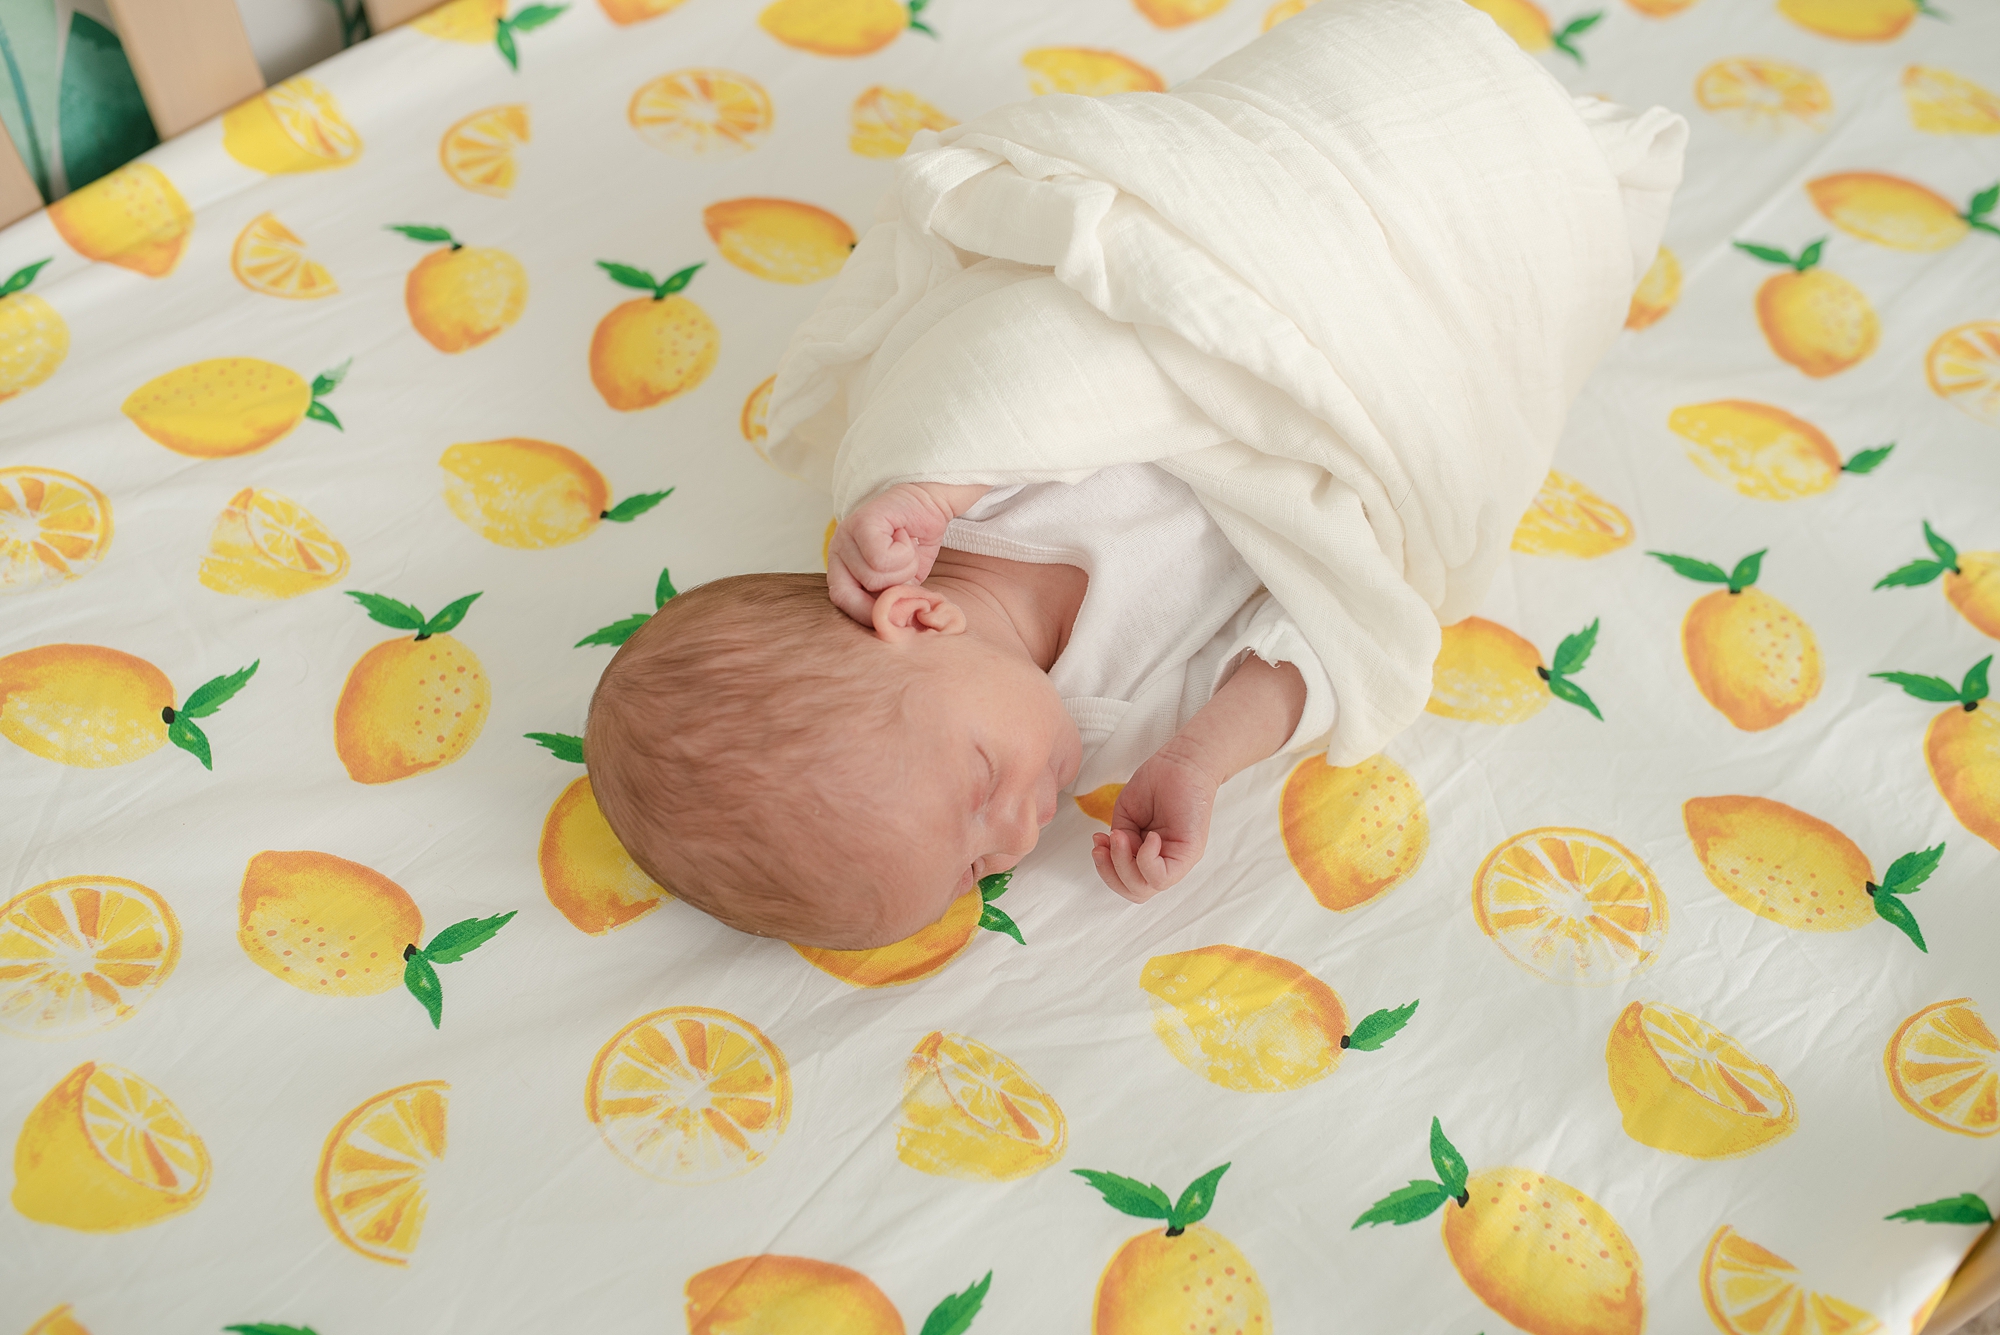 baby girl laying in her crib is swaddled in a white swaddle and is laying down on her cribsheets which are lemon print